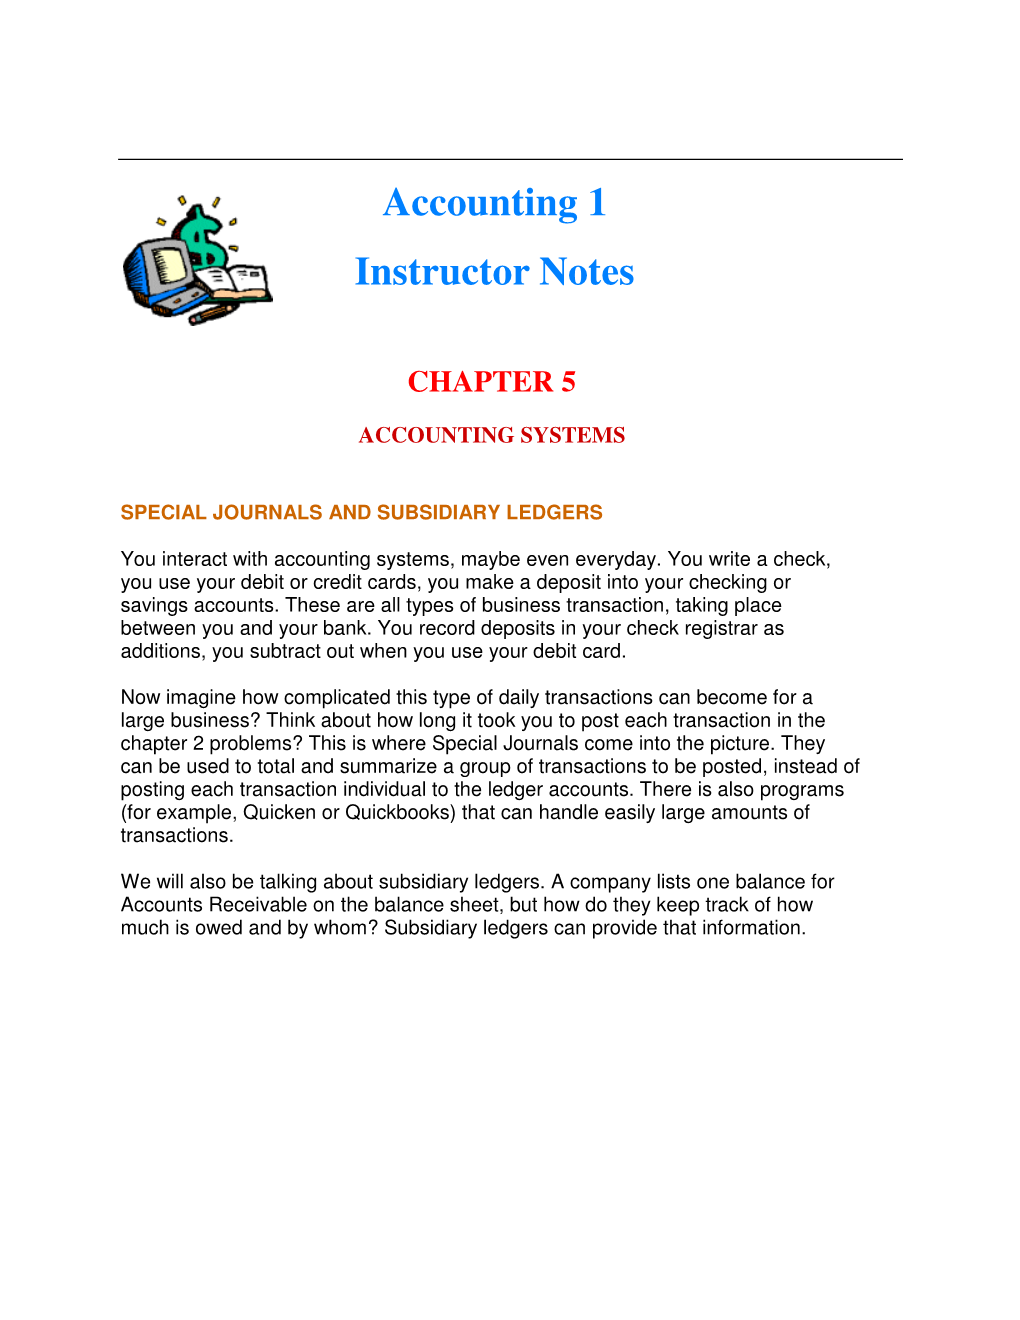 Accounting 1 Instructor Notes